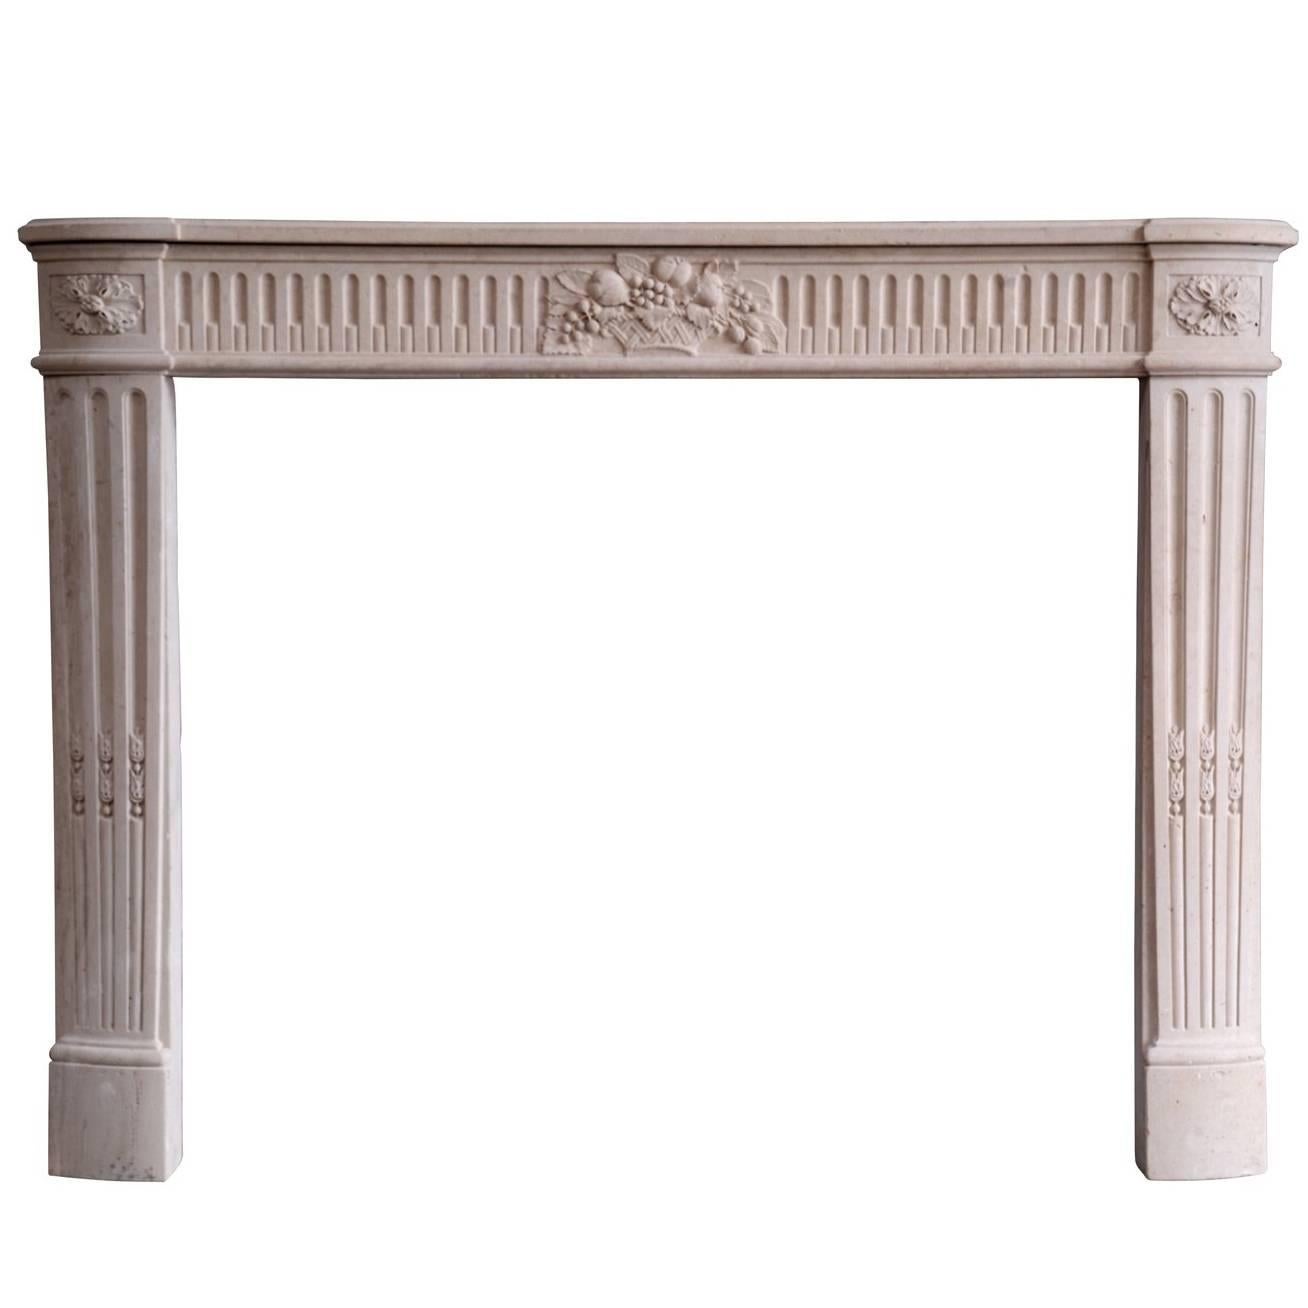 French Louis XVI Period Stone Fireplace, 18th Century For Sale